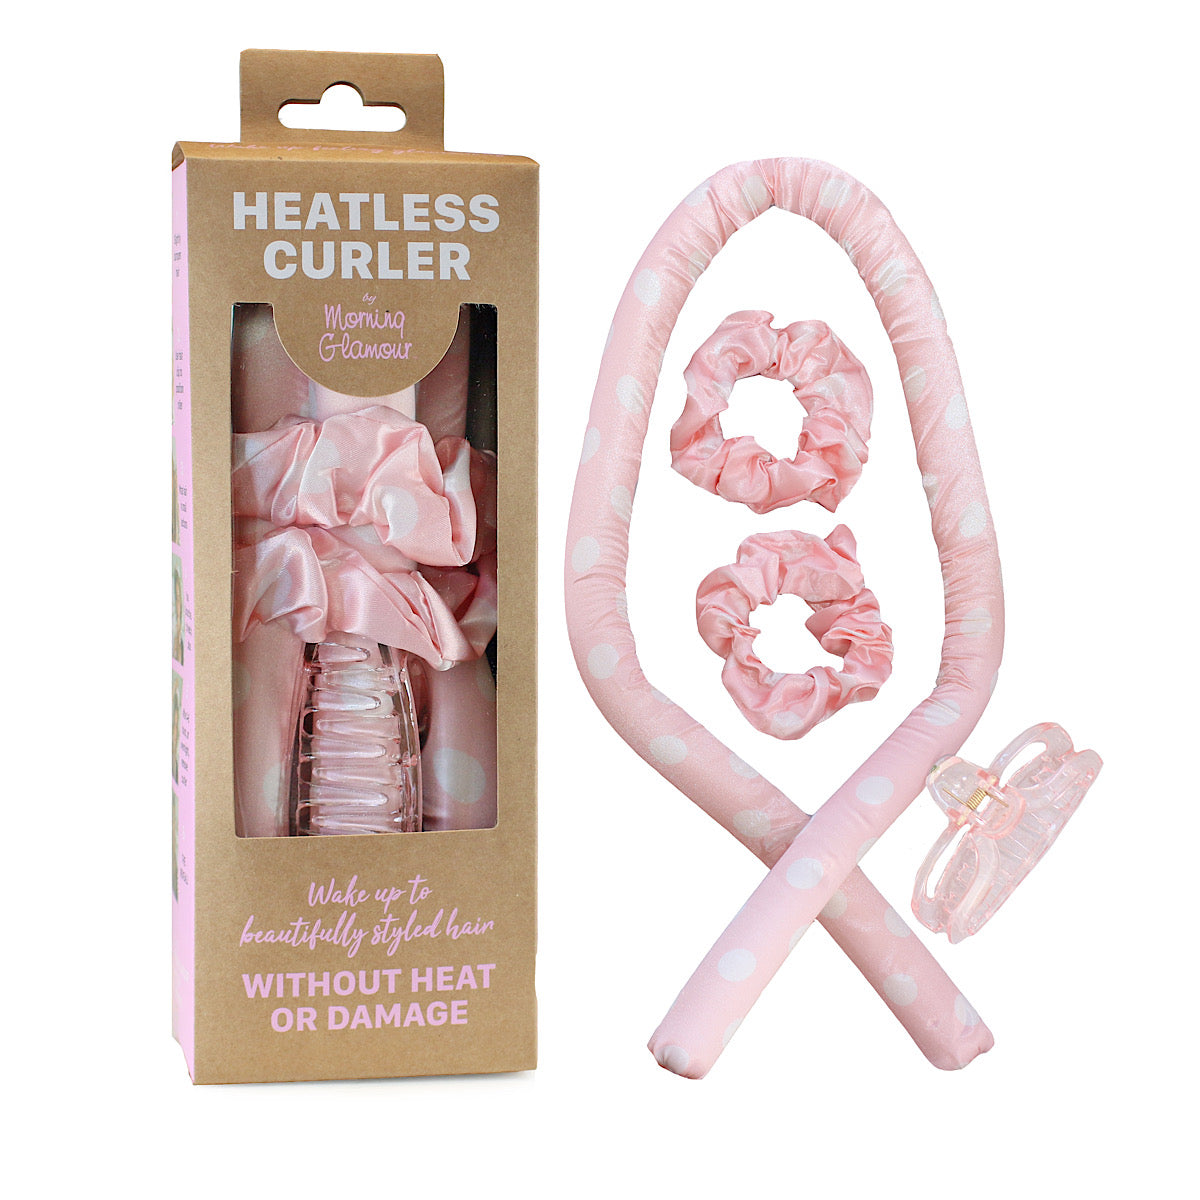 Satin Heatless Curler -Eco-Friendly packaging(multiple color options available)